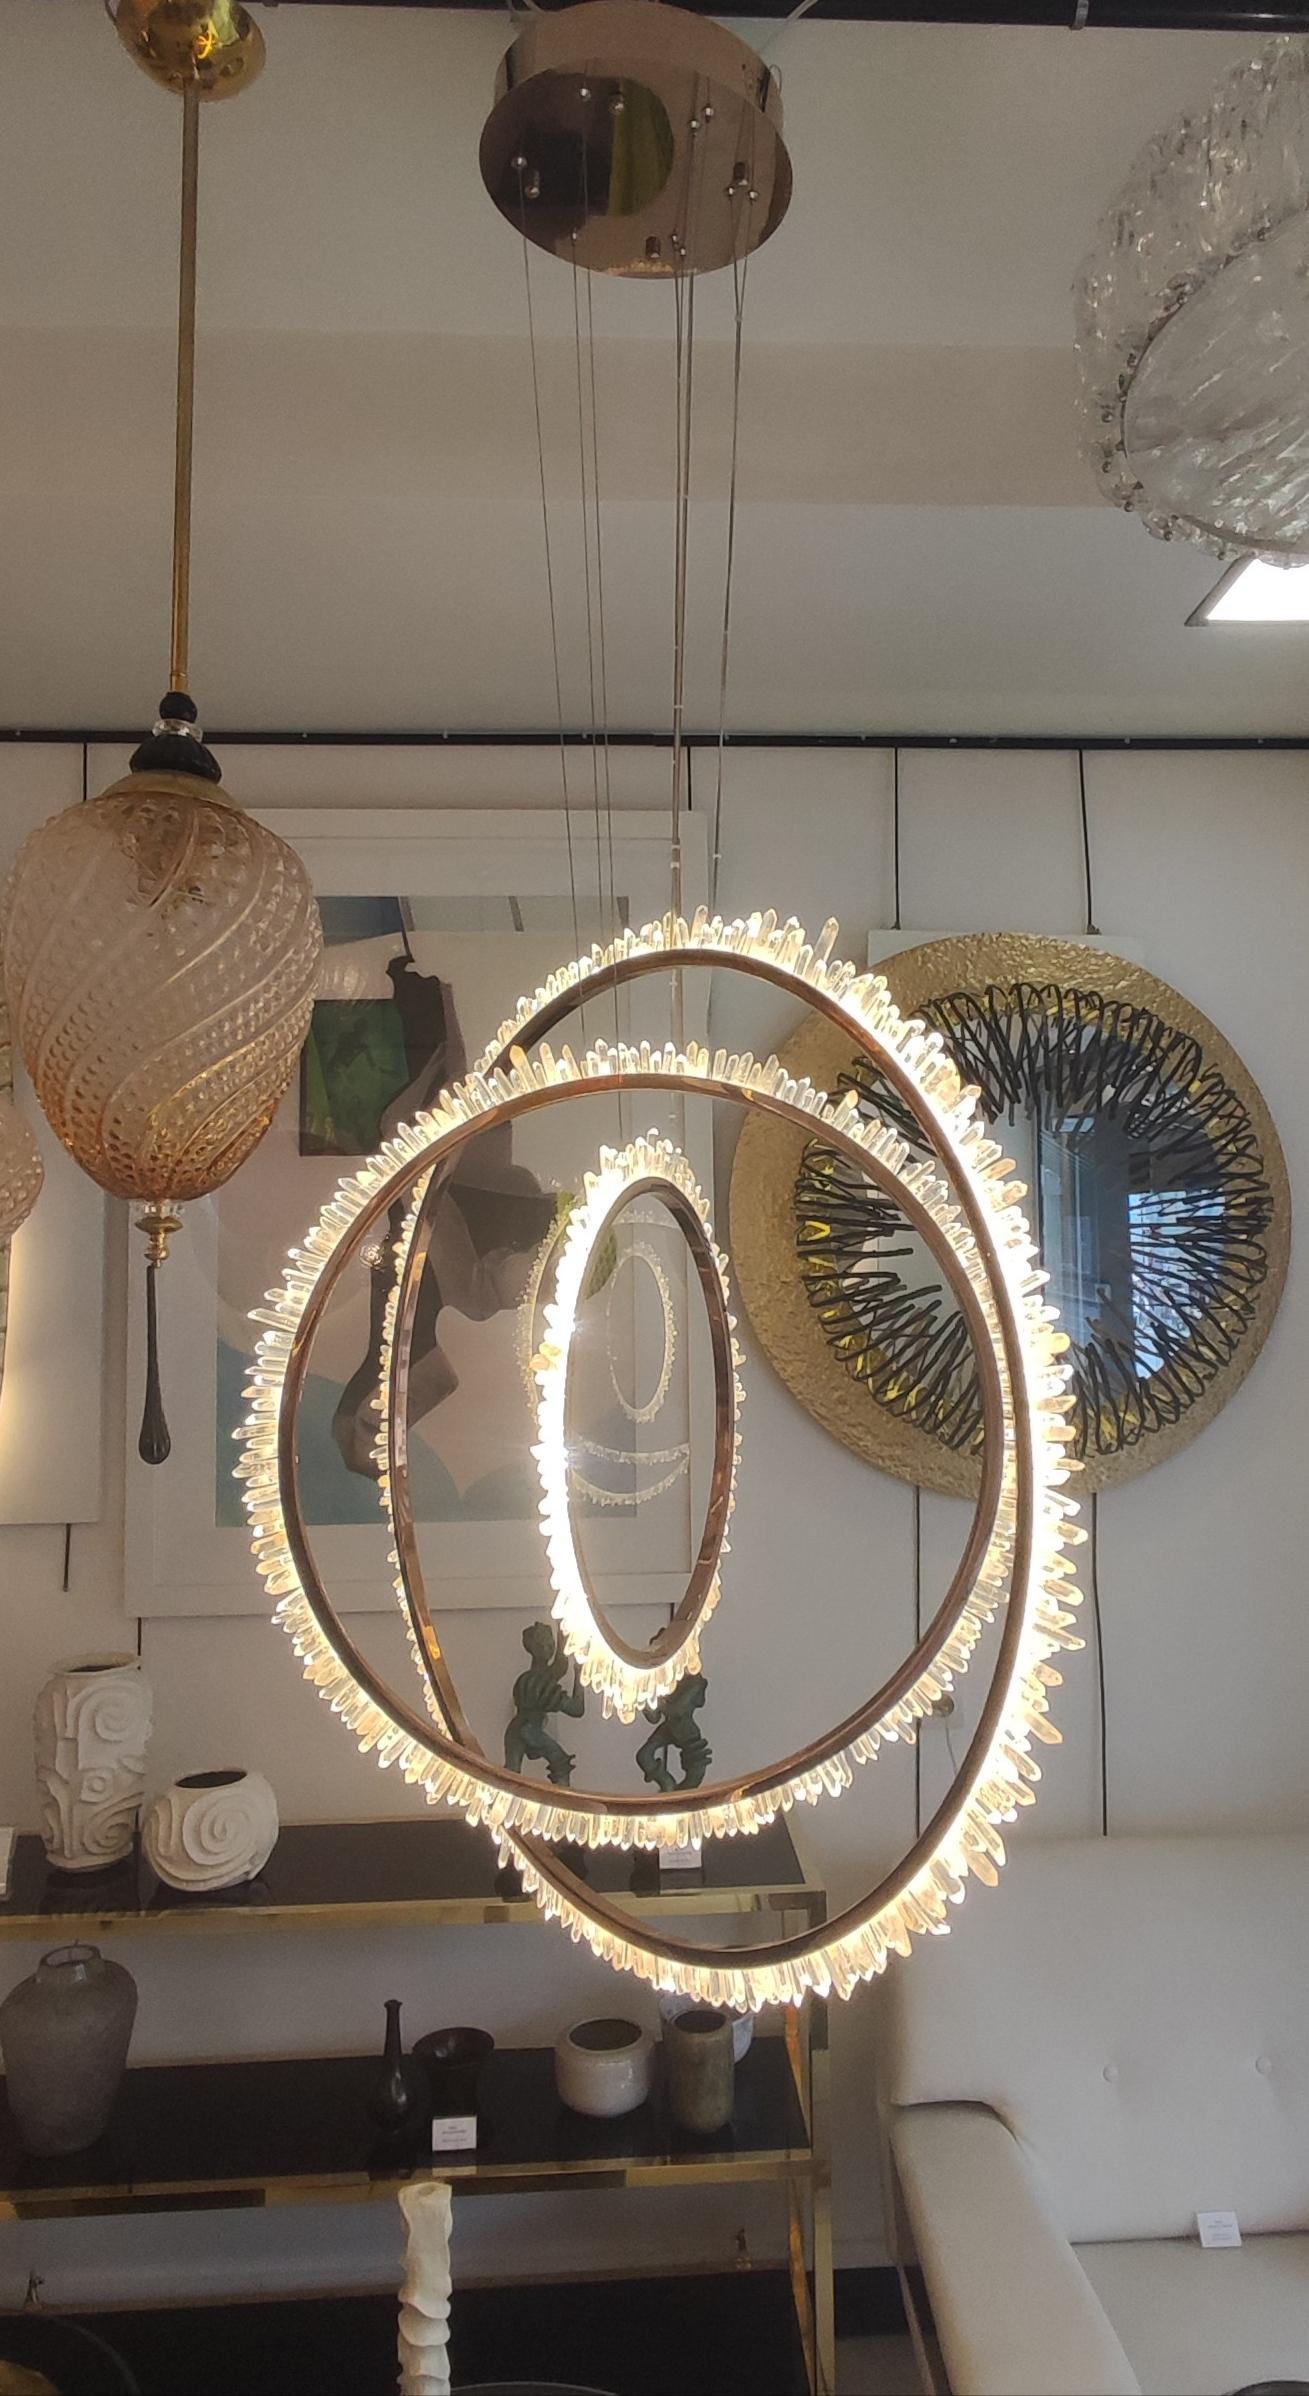 3 rock crystal ( natural stones) and brass circles ceiling light, illuminated by leds.
Measures: diameter 45 cm, diameter 65 cm, diameter 85 cm, 
Dimensions without crystals 40/60/80/
Adjustable height, here 160cm 
 but adjustable as far 2.2